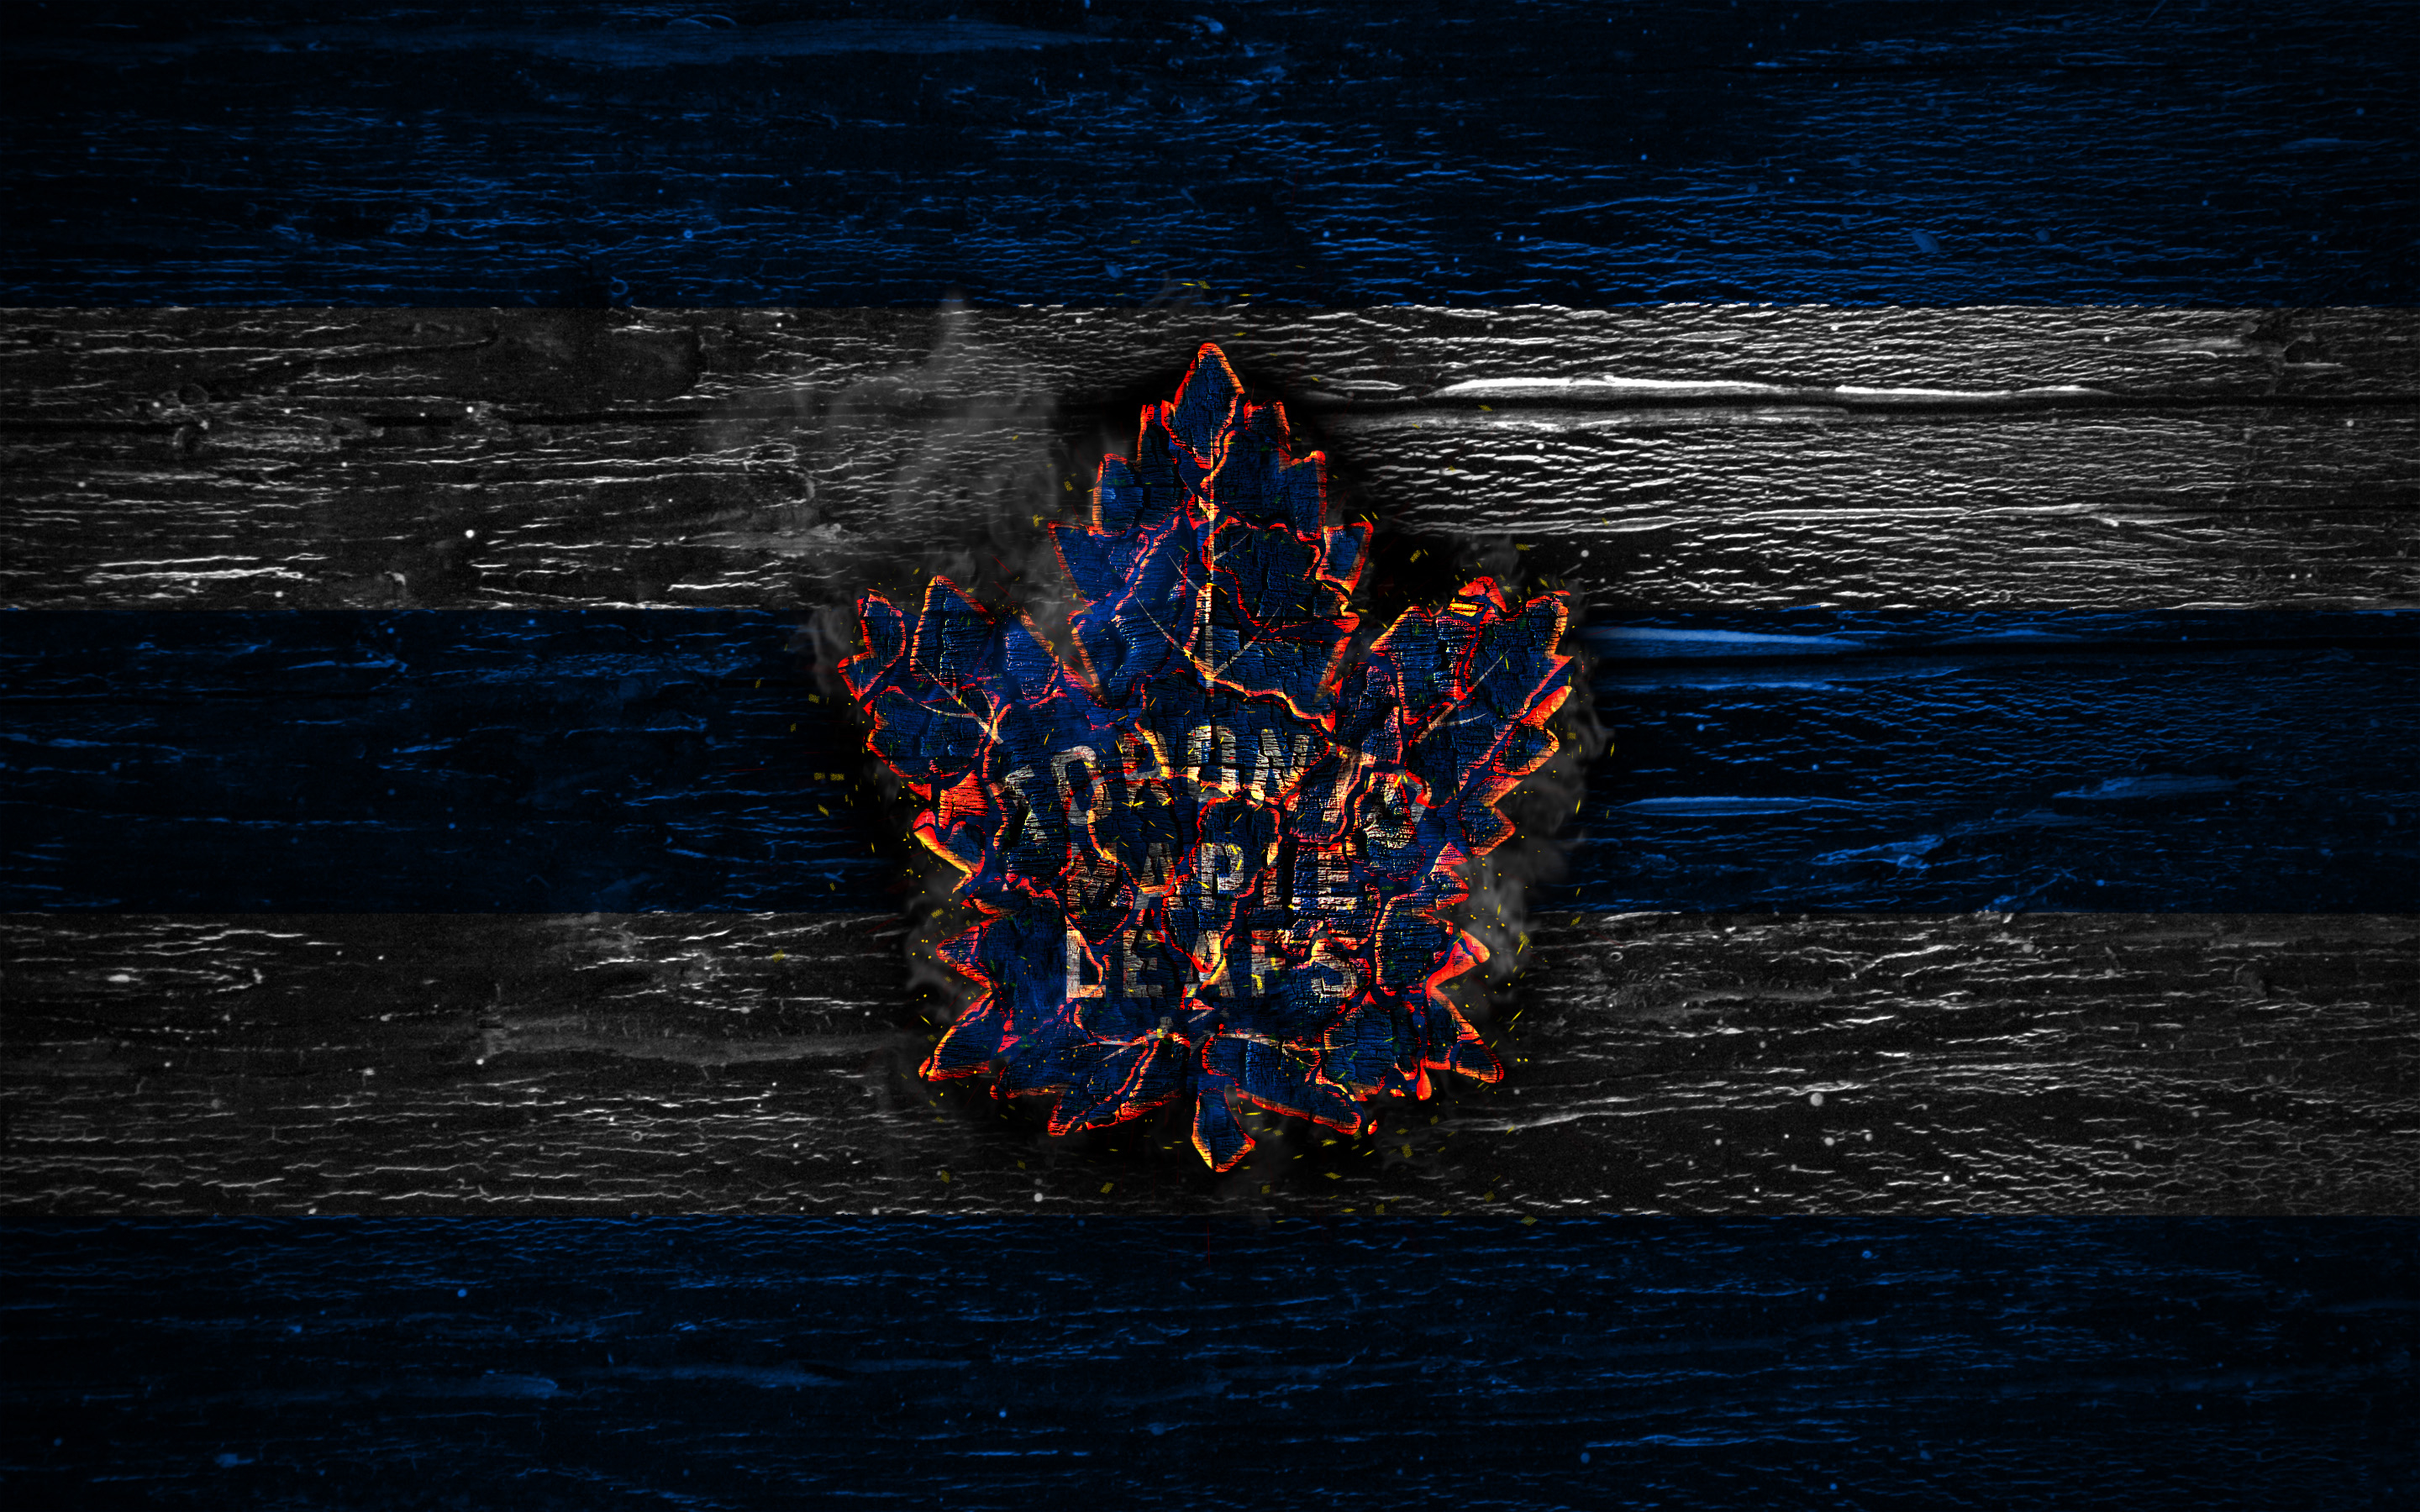 Toronto maple leafs Wallpapers - Free by ZEDGE™  Toronto maple leafs  wallpaper, Toronto maple leafs, Maple leafs wallpaper